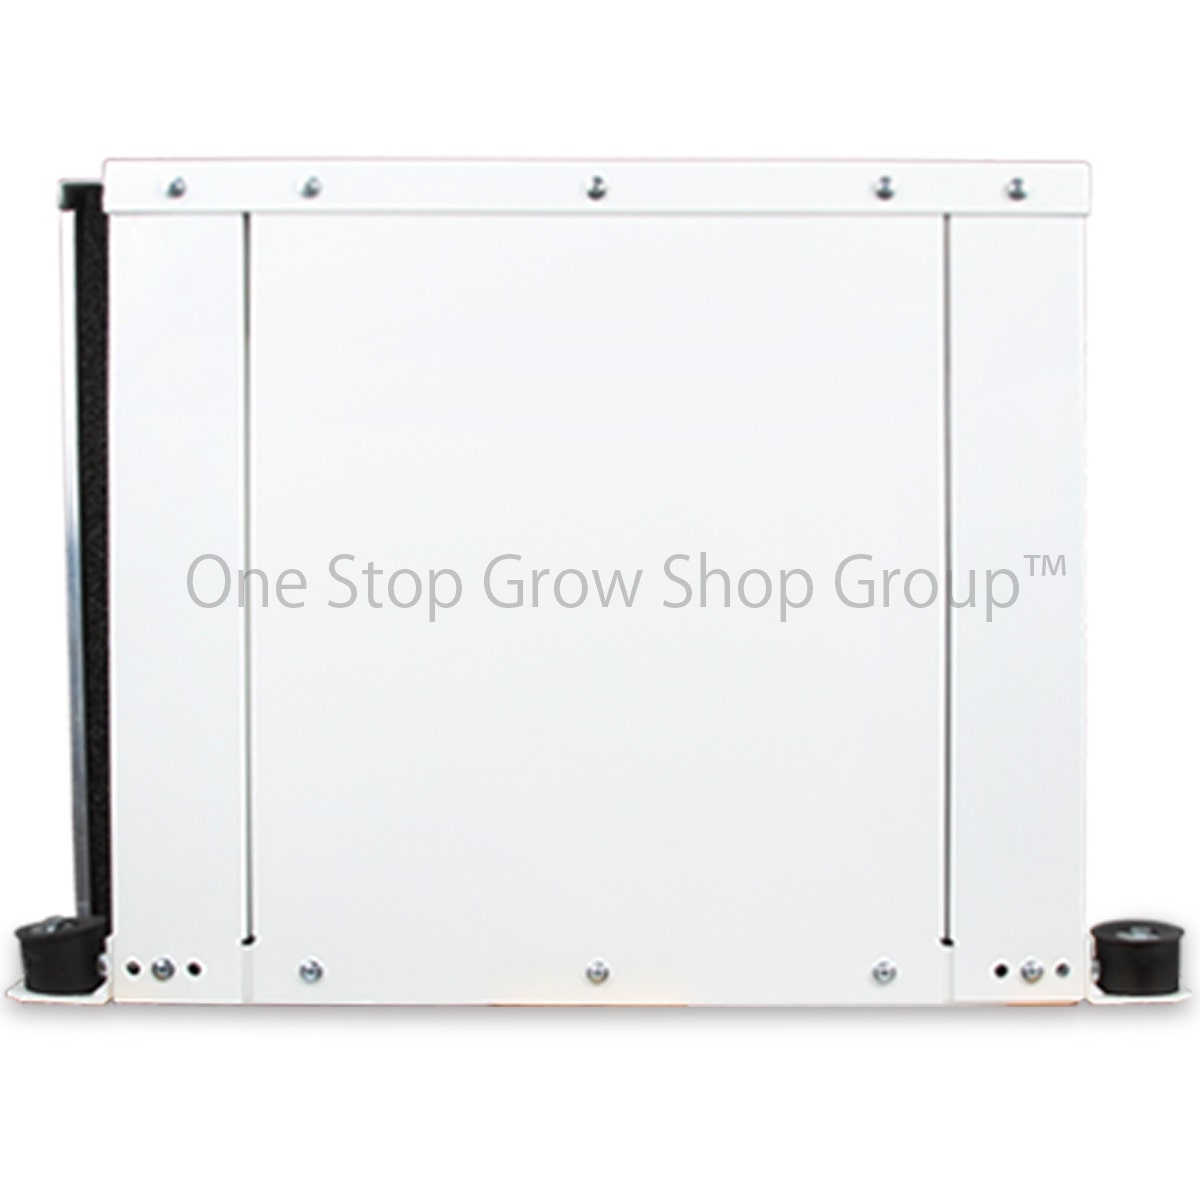 Opticlimate Pro 3 - Water-cooled Grow Room Air Conditioning Unit